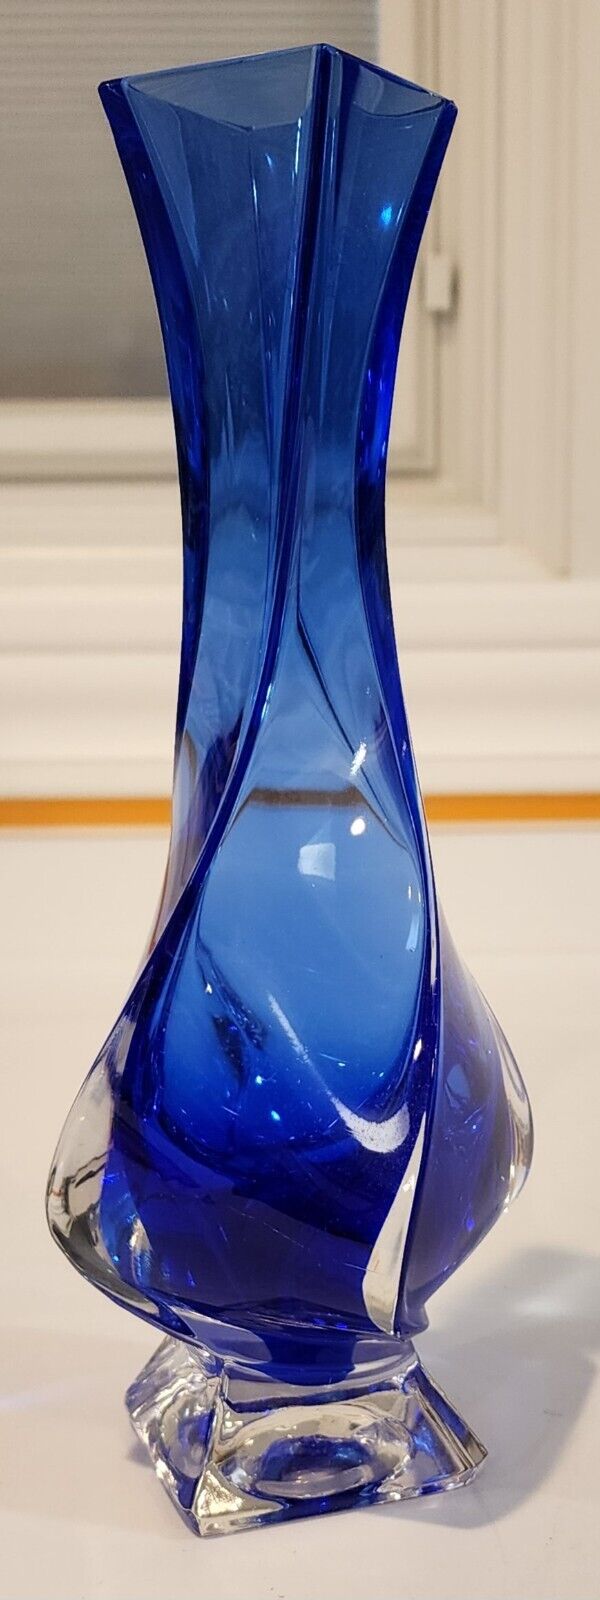 New ROYAL GALLERY LEAD CRYSTAL TWISTED COBALT BLUE VASE MADE IN ITALY 9\